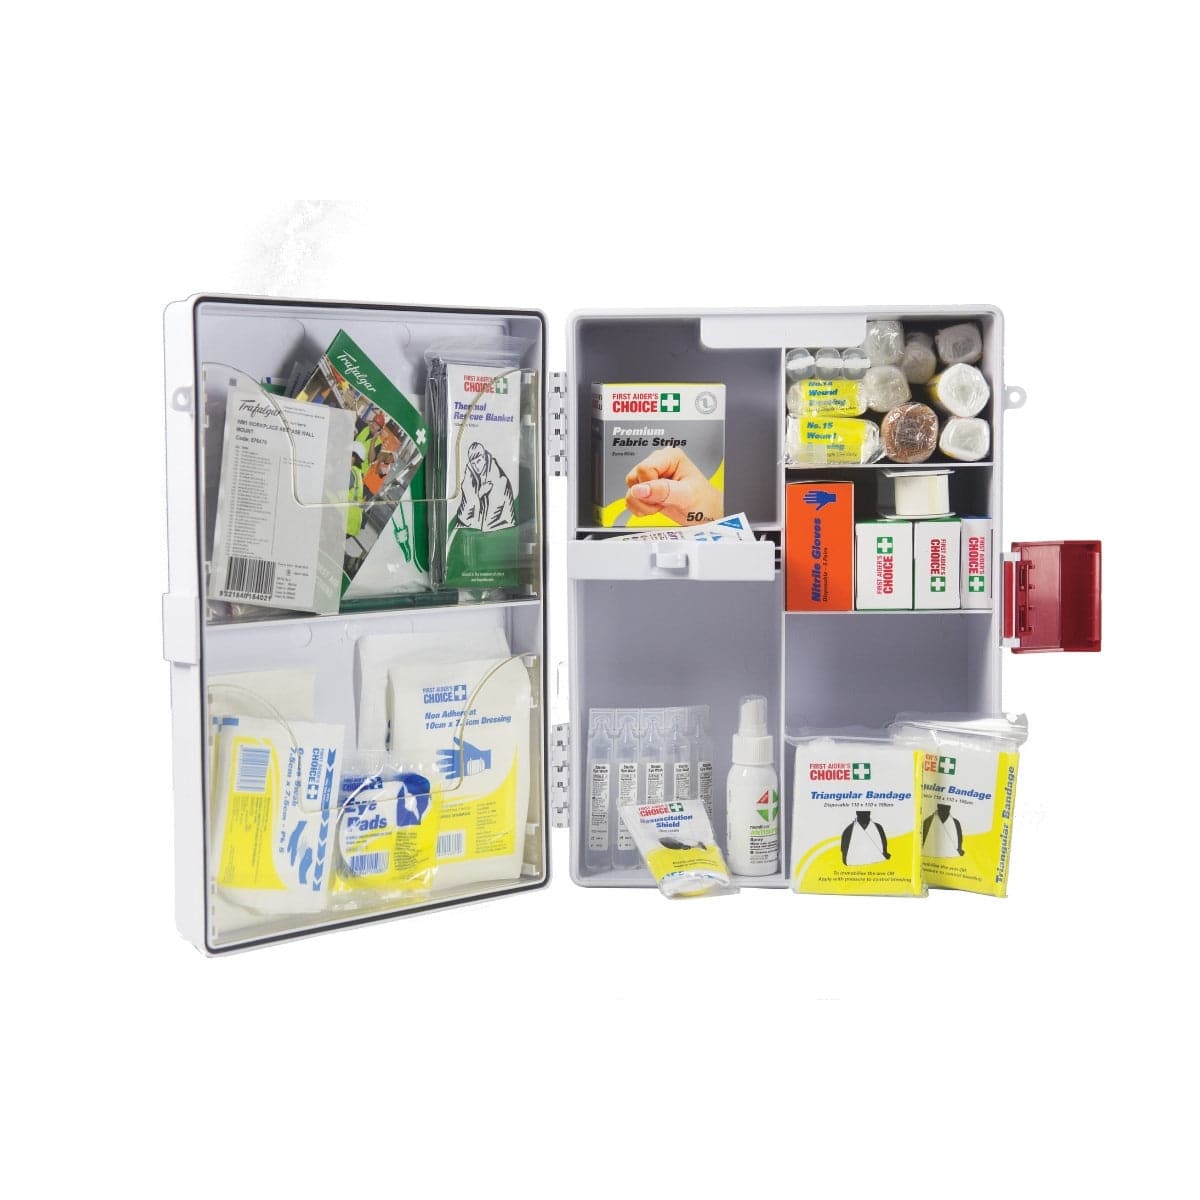 Workplace First Aid Kit - Wall Mount WM1 (Plastic Case)